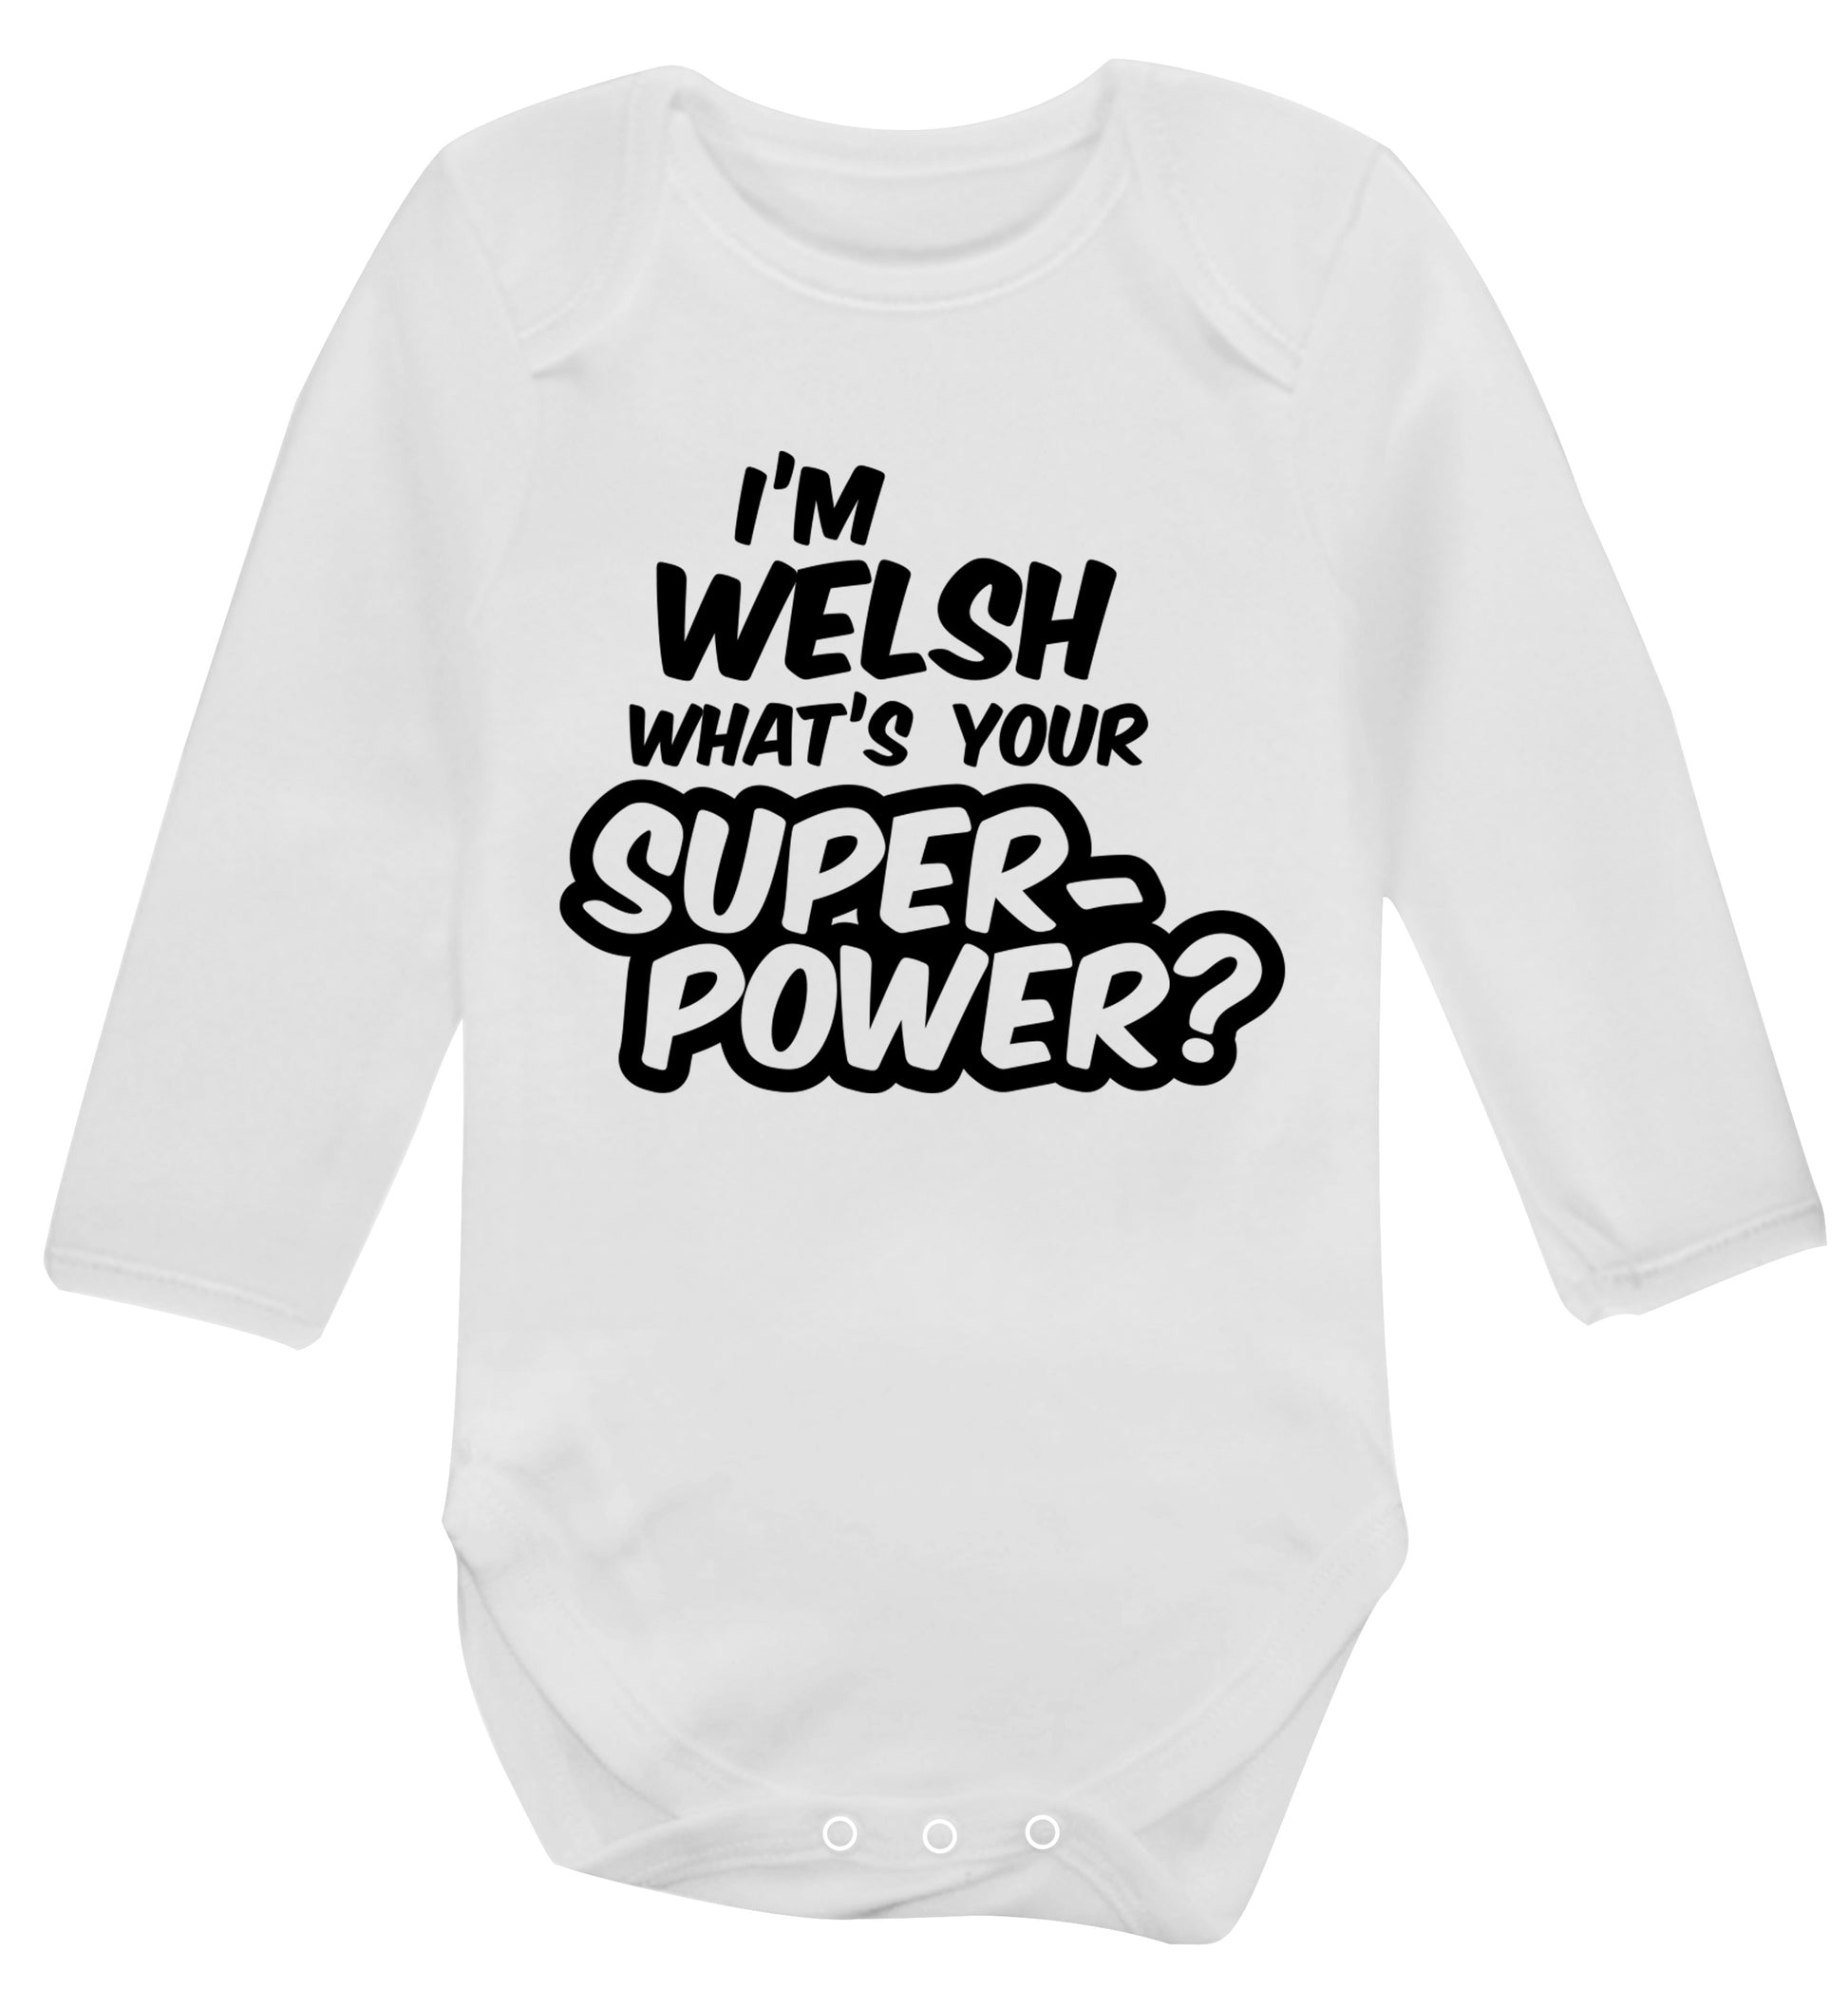 I'm Welsh what's your superpower? Baby Vest long sleeved white 6-12 months